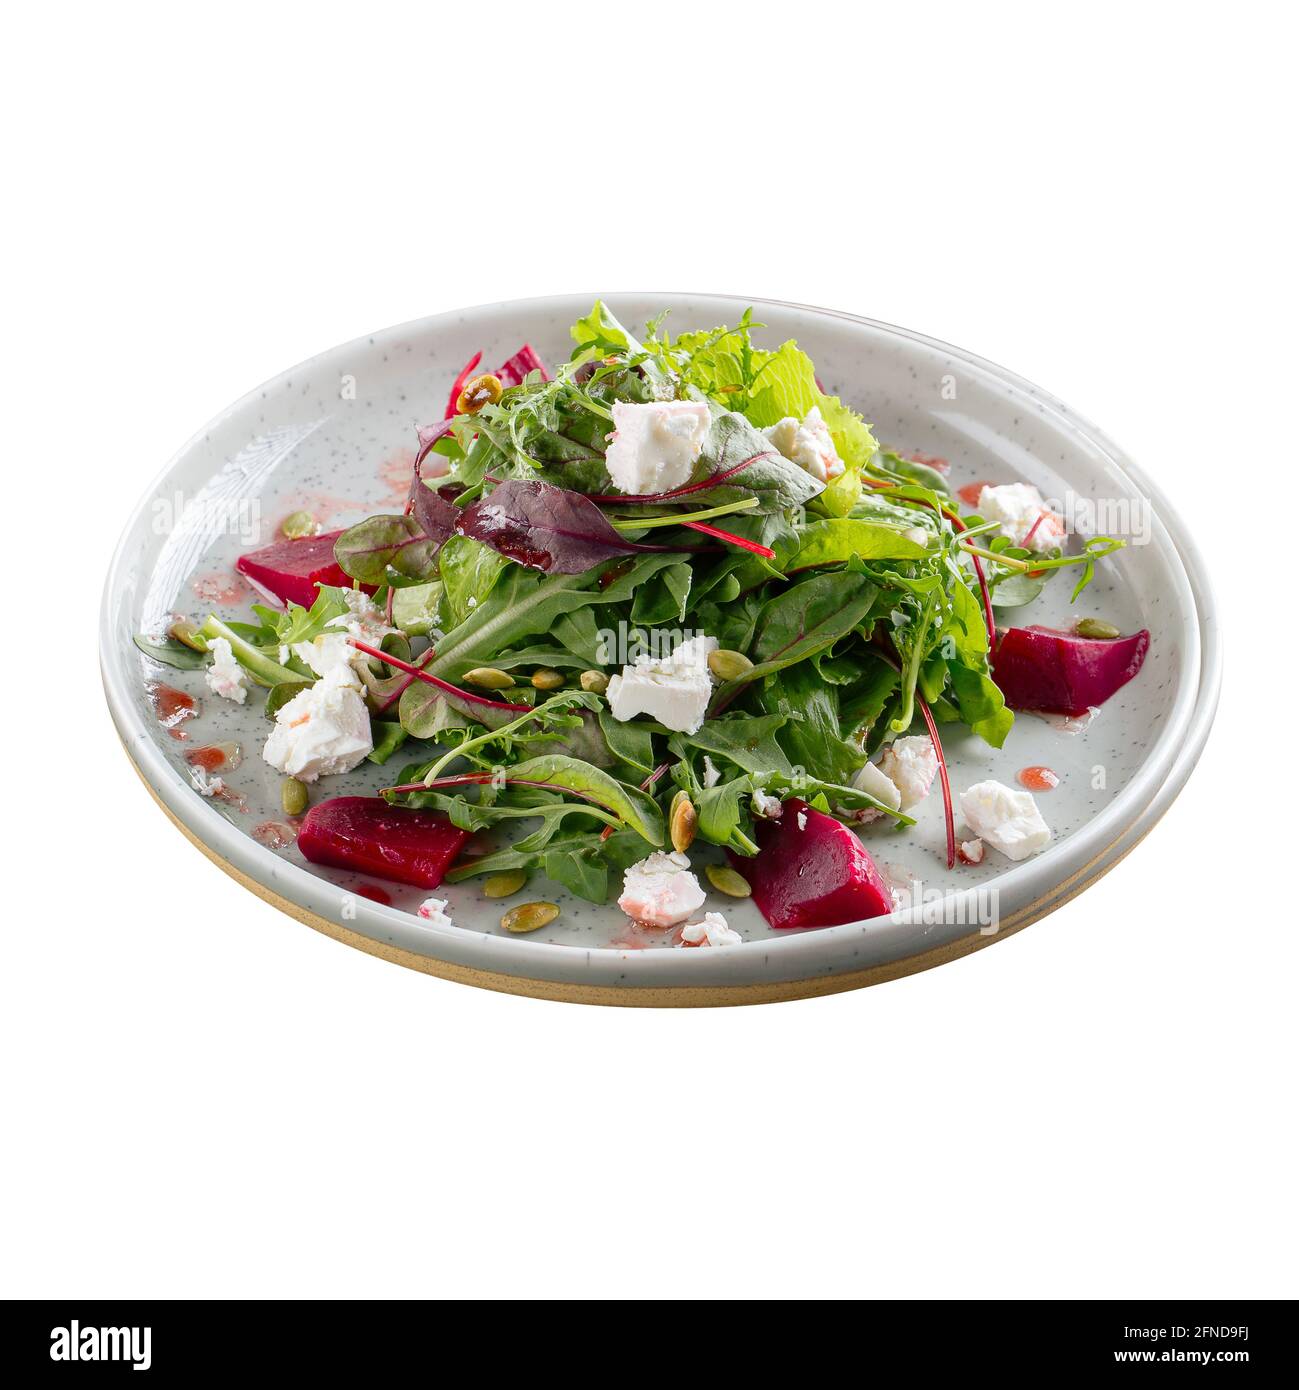 Isolated plate of beetroot salad with feta cheese Stock Photo